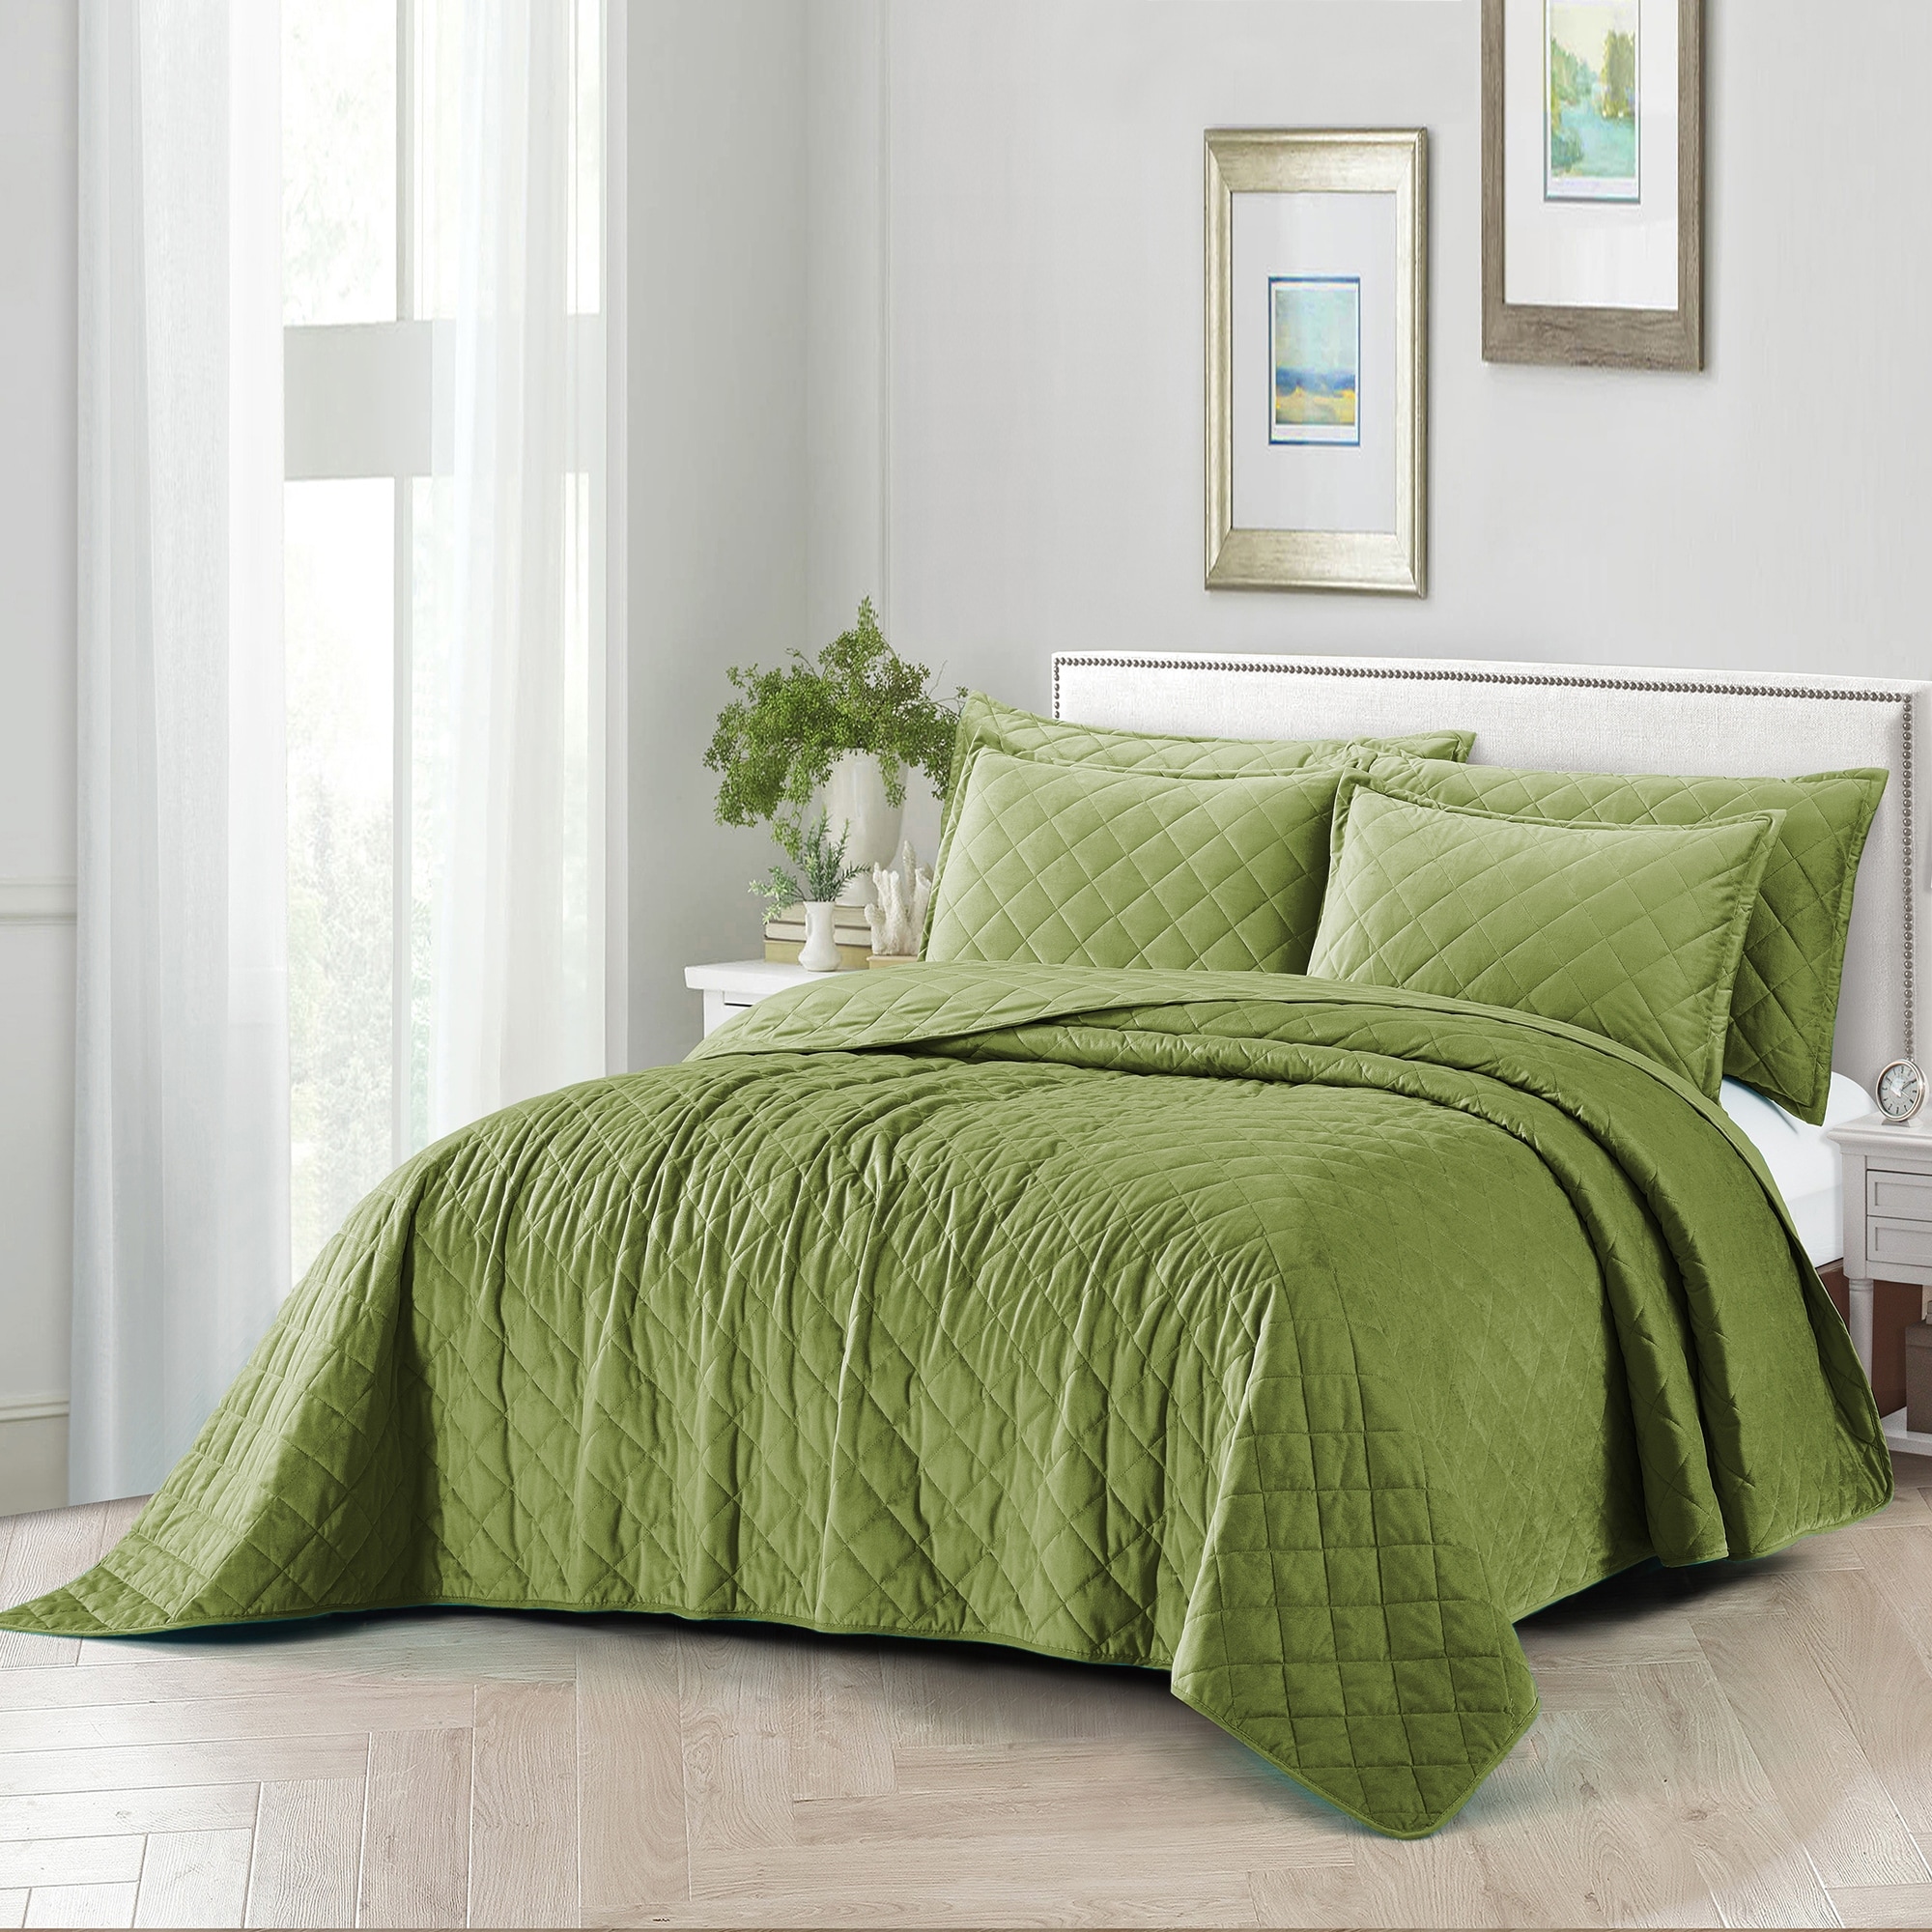 King Size Solid Color Quilts and Bedspreads - Bed Bath & Beyond